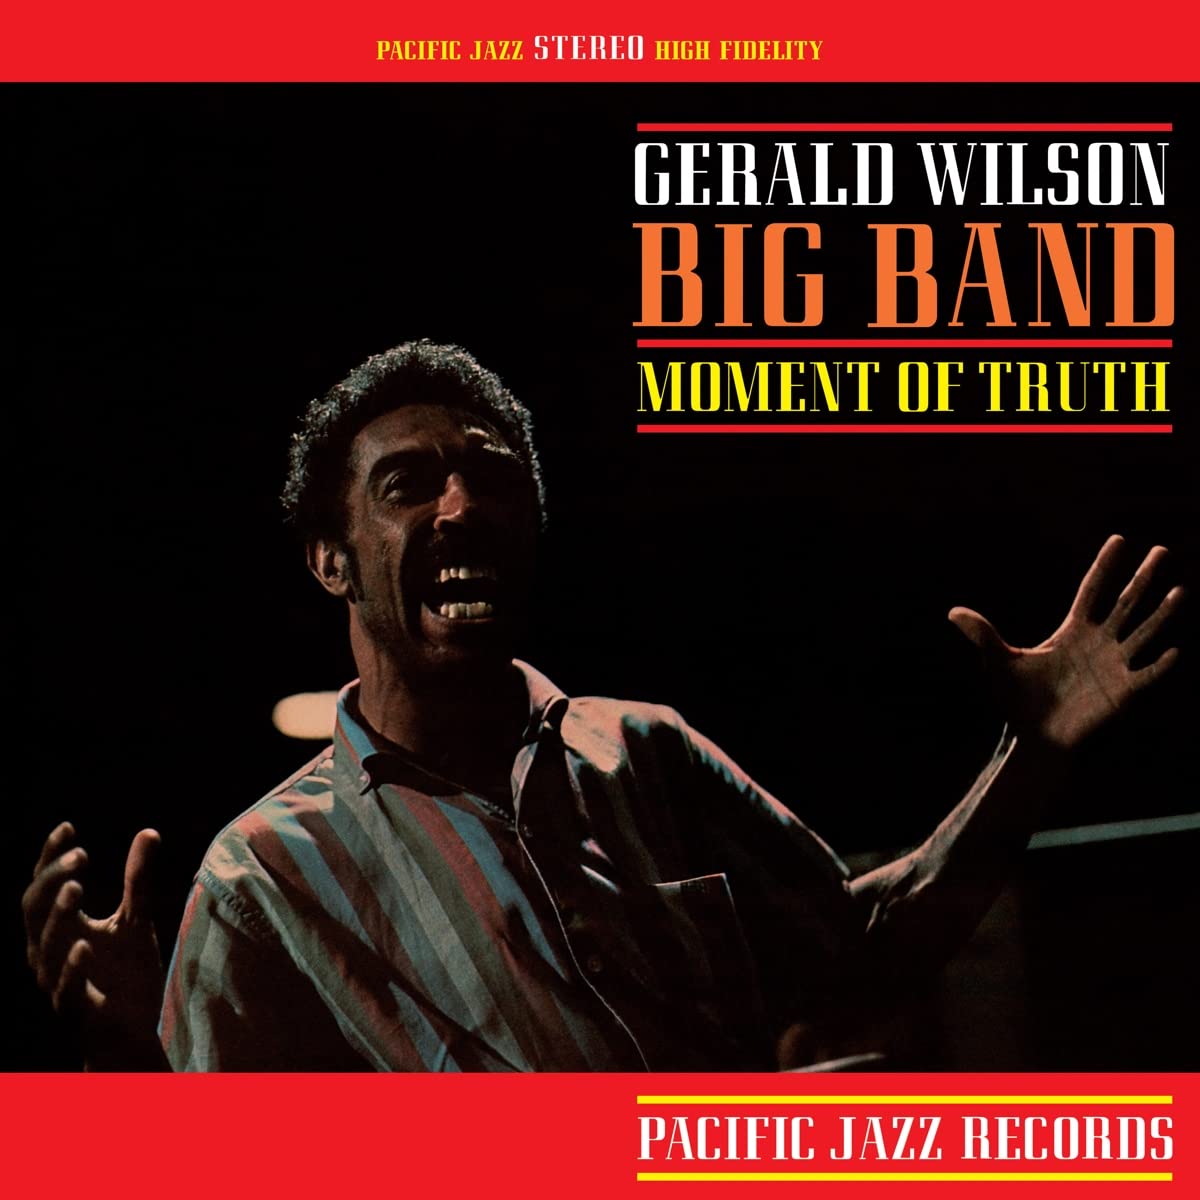 Gerald Wilson Big Band – Moment Of Truth LP (Blue Note Tone Poet Series, 180g, Audiophile)